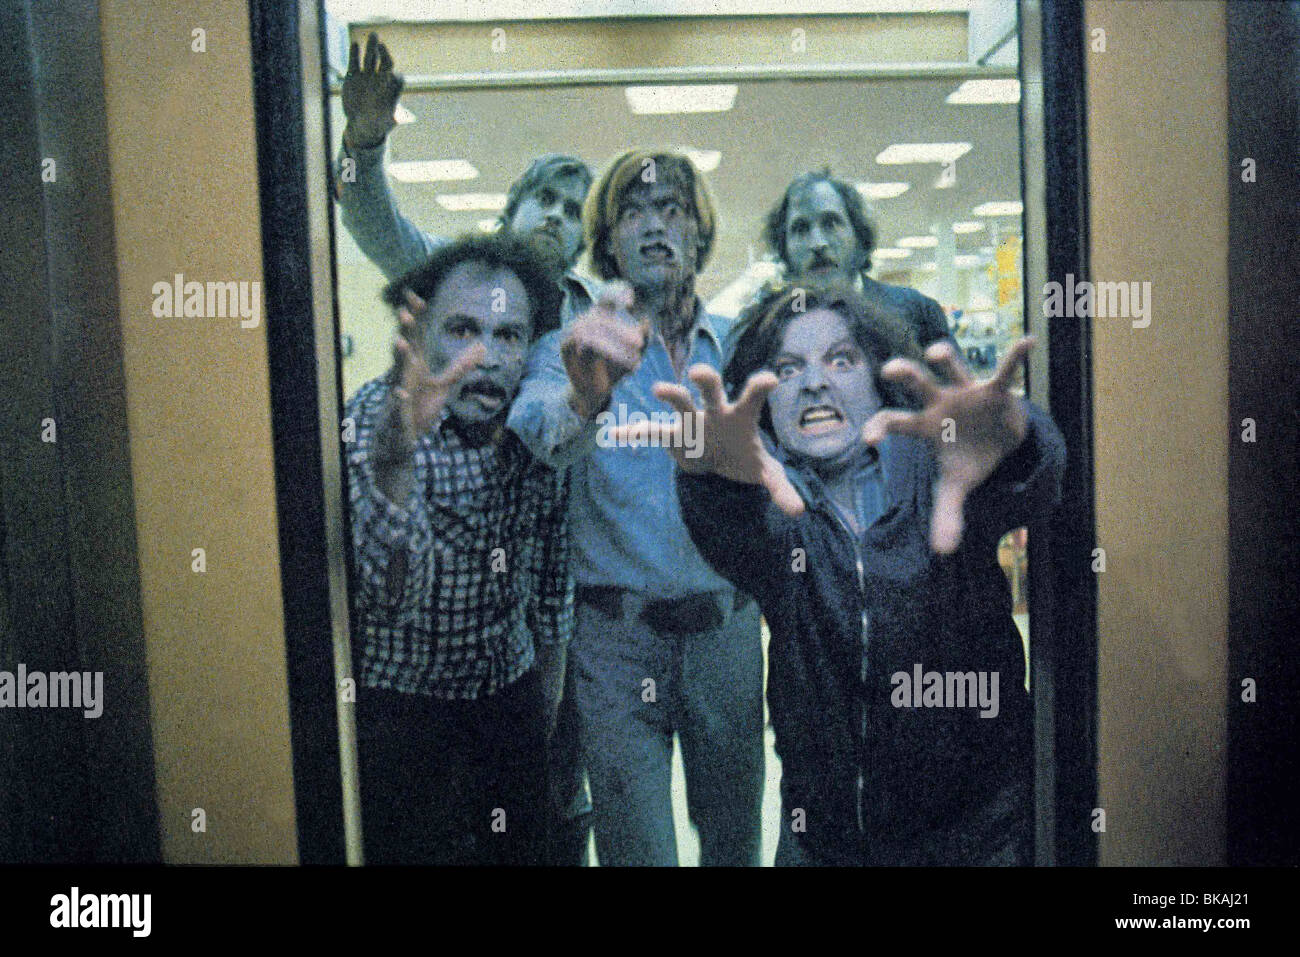 DAWN OF THE DEAD (1978) ZOMBIE (ALT) DODE 001 Stockfoto